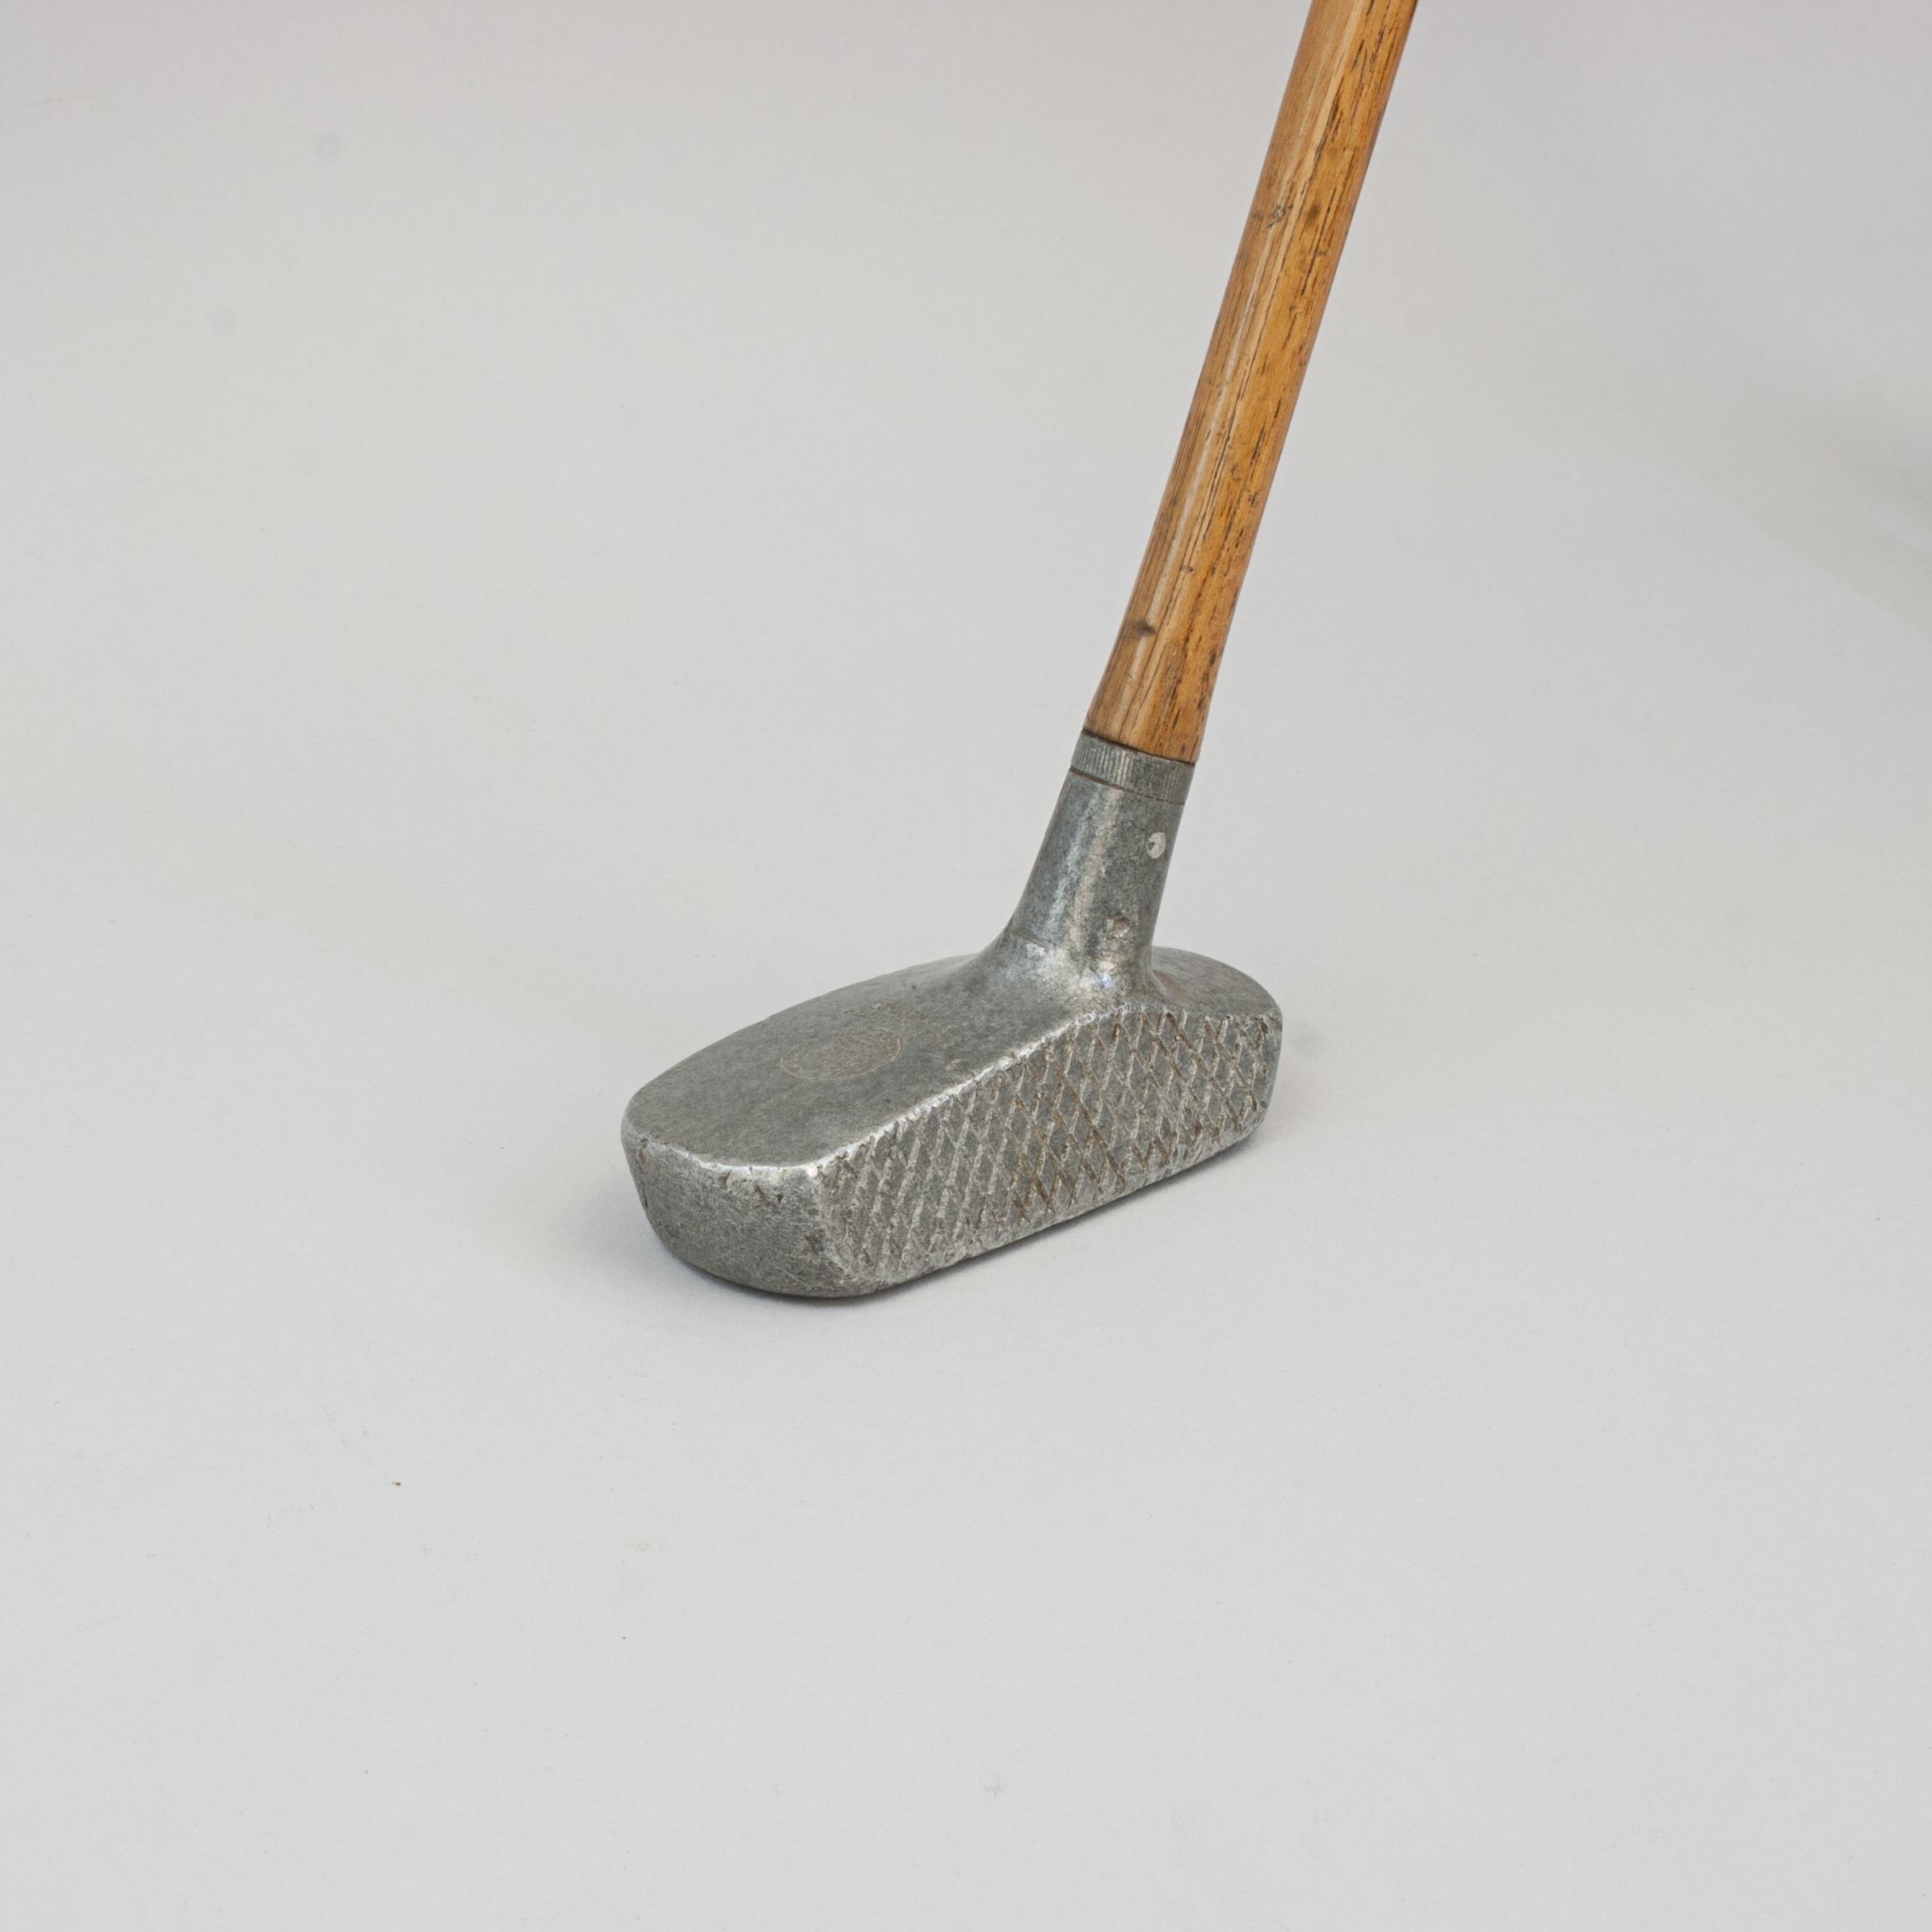 Aluminium Center Shafted Schenectady Putter.
A good example of an aluminium Schenectady putter by Spalding. The club head with diamond face markings, the crown is stamped 'A.G. Spalding & Bros., Made In Gt. Britain' in a circle with the Spalding